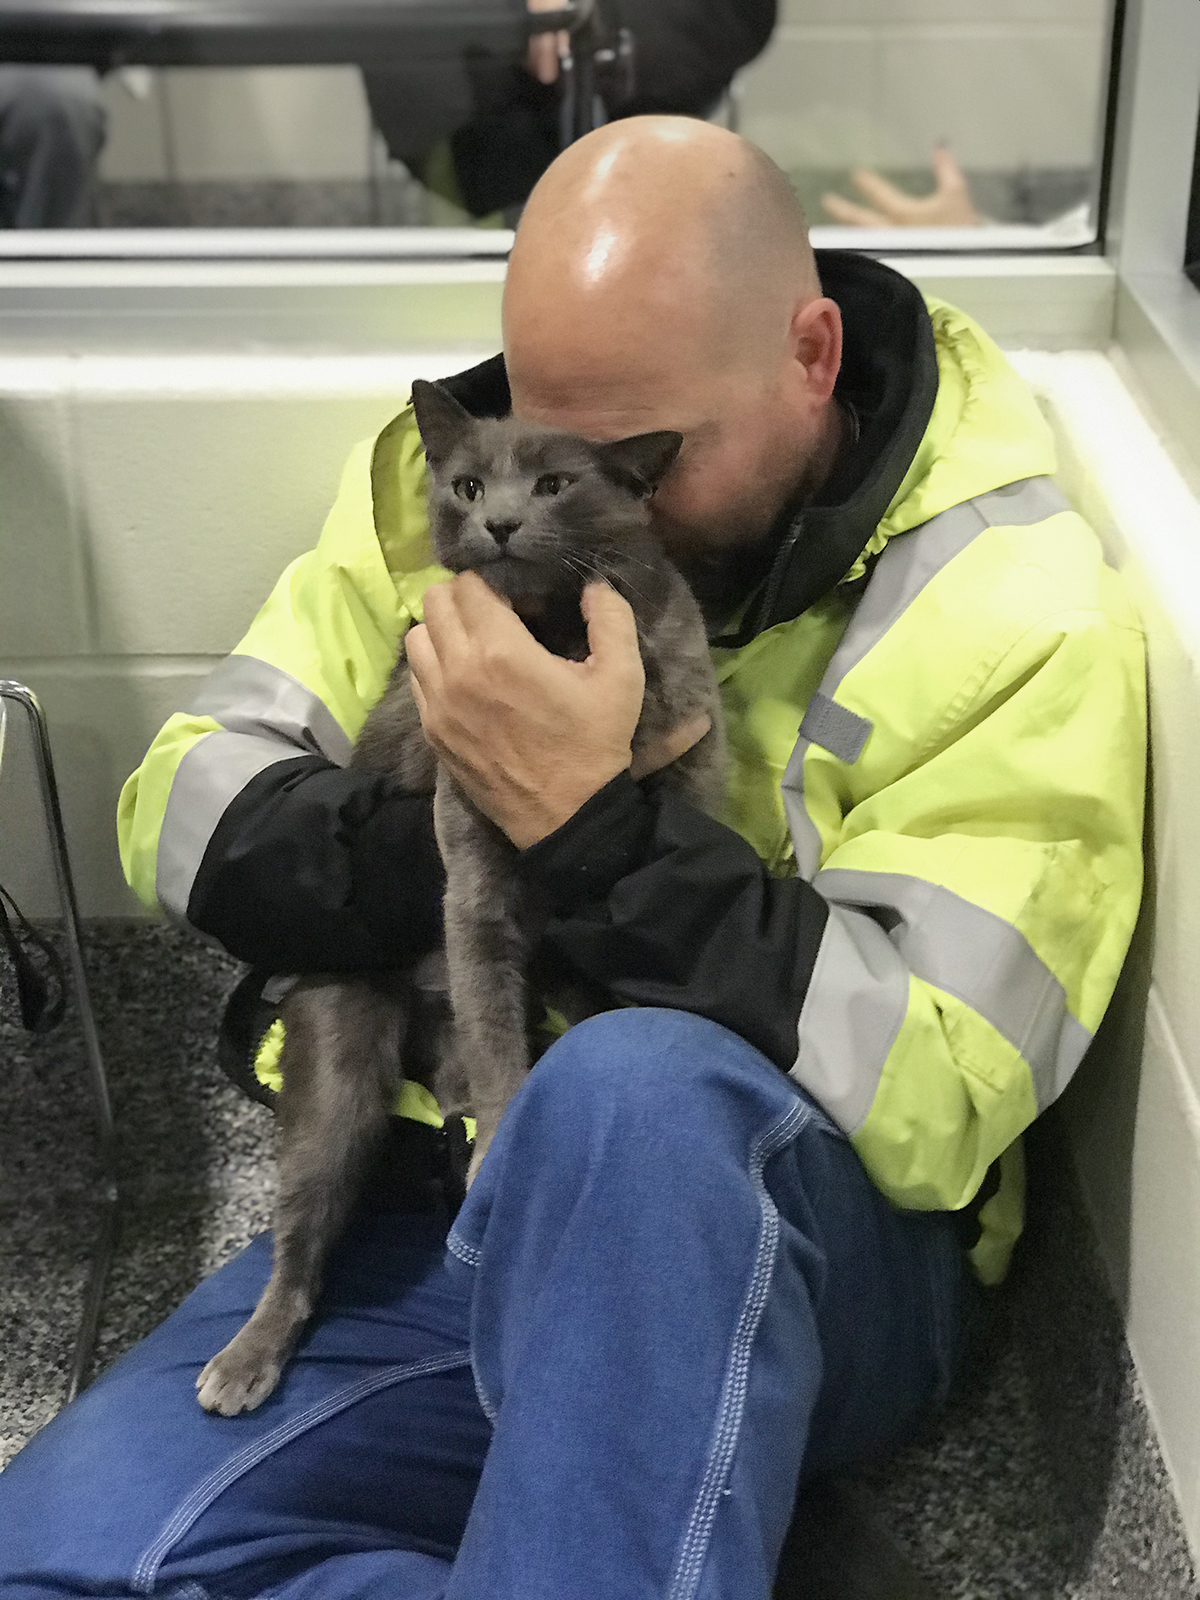 PHOTO: Ashes, a 3-year-old cat found at a truck stop in Ohio, was reunited with his owner with the help of his microchip.